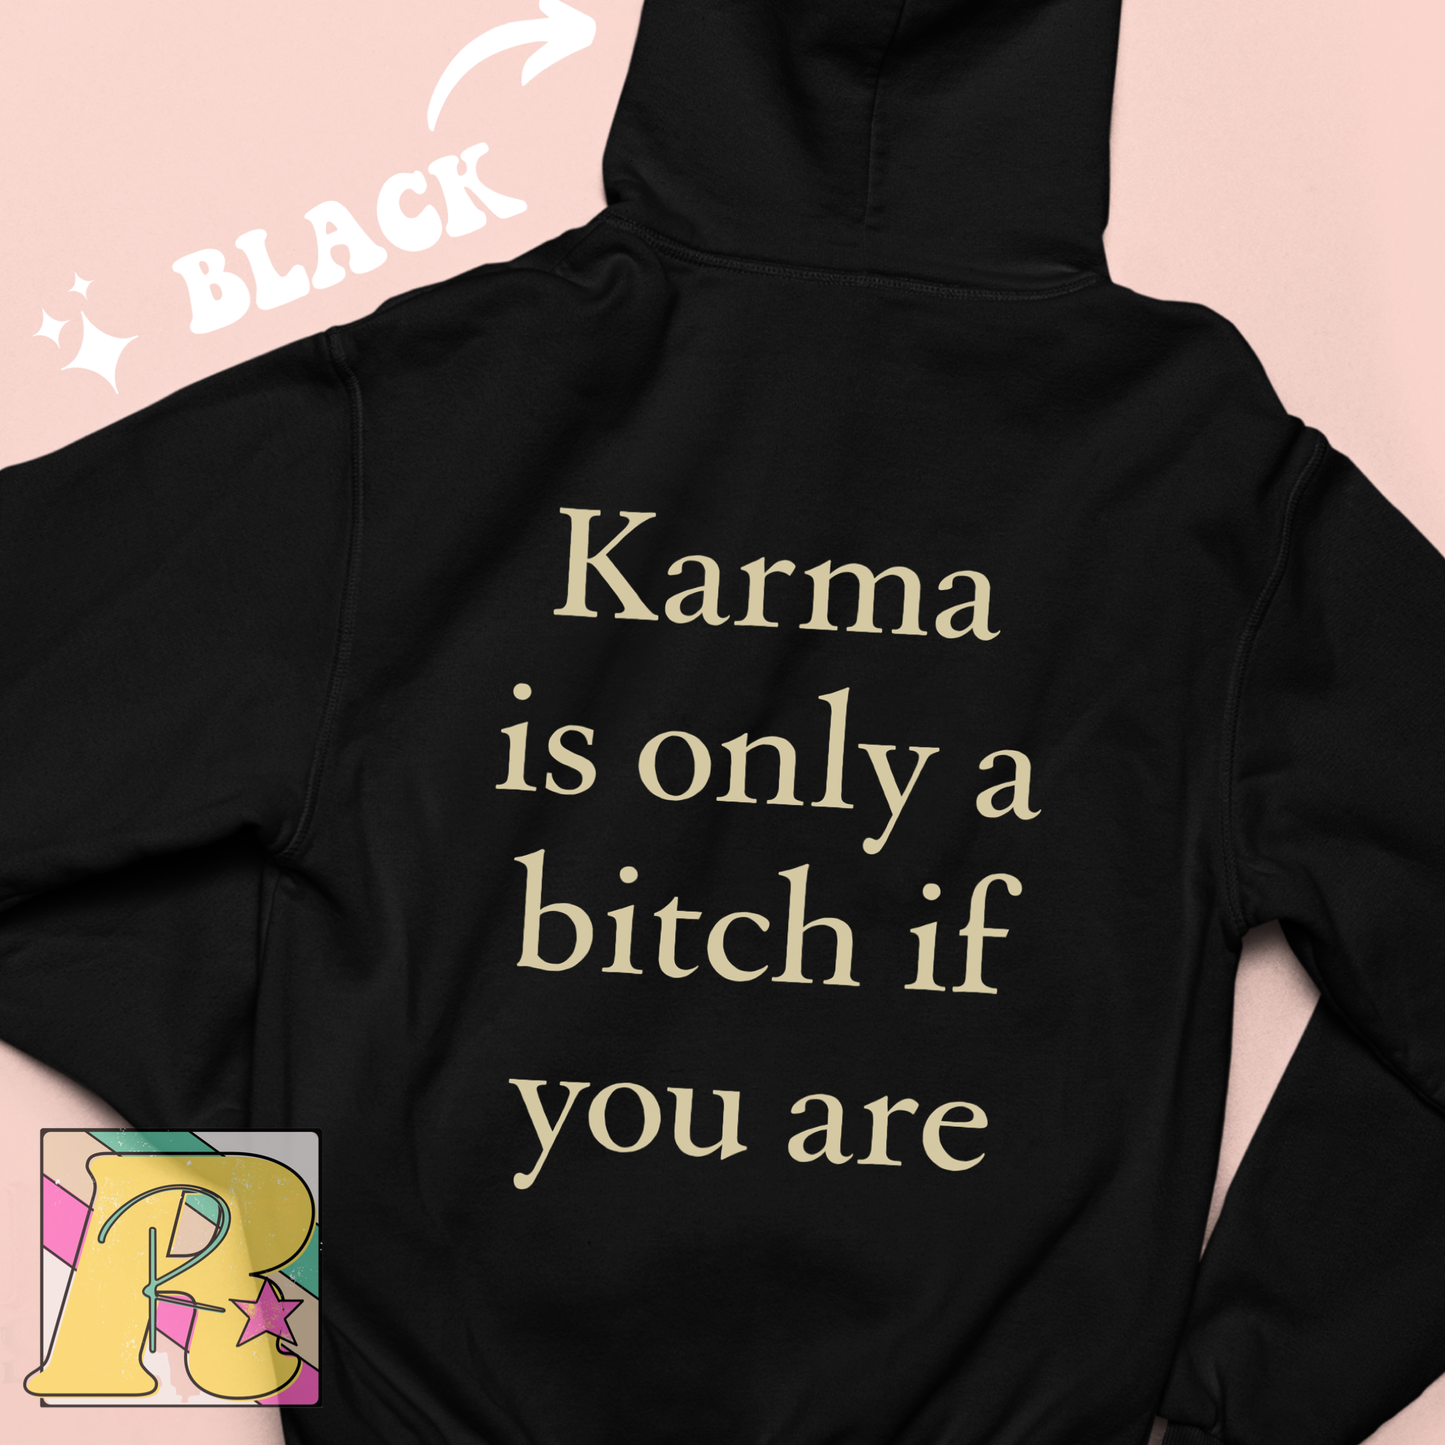 Karma Is Only A Bitch If You Are Hoodie - Gray